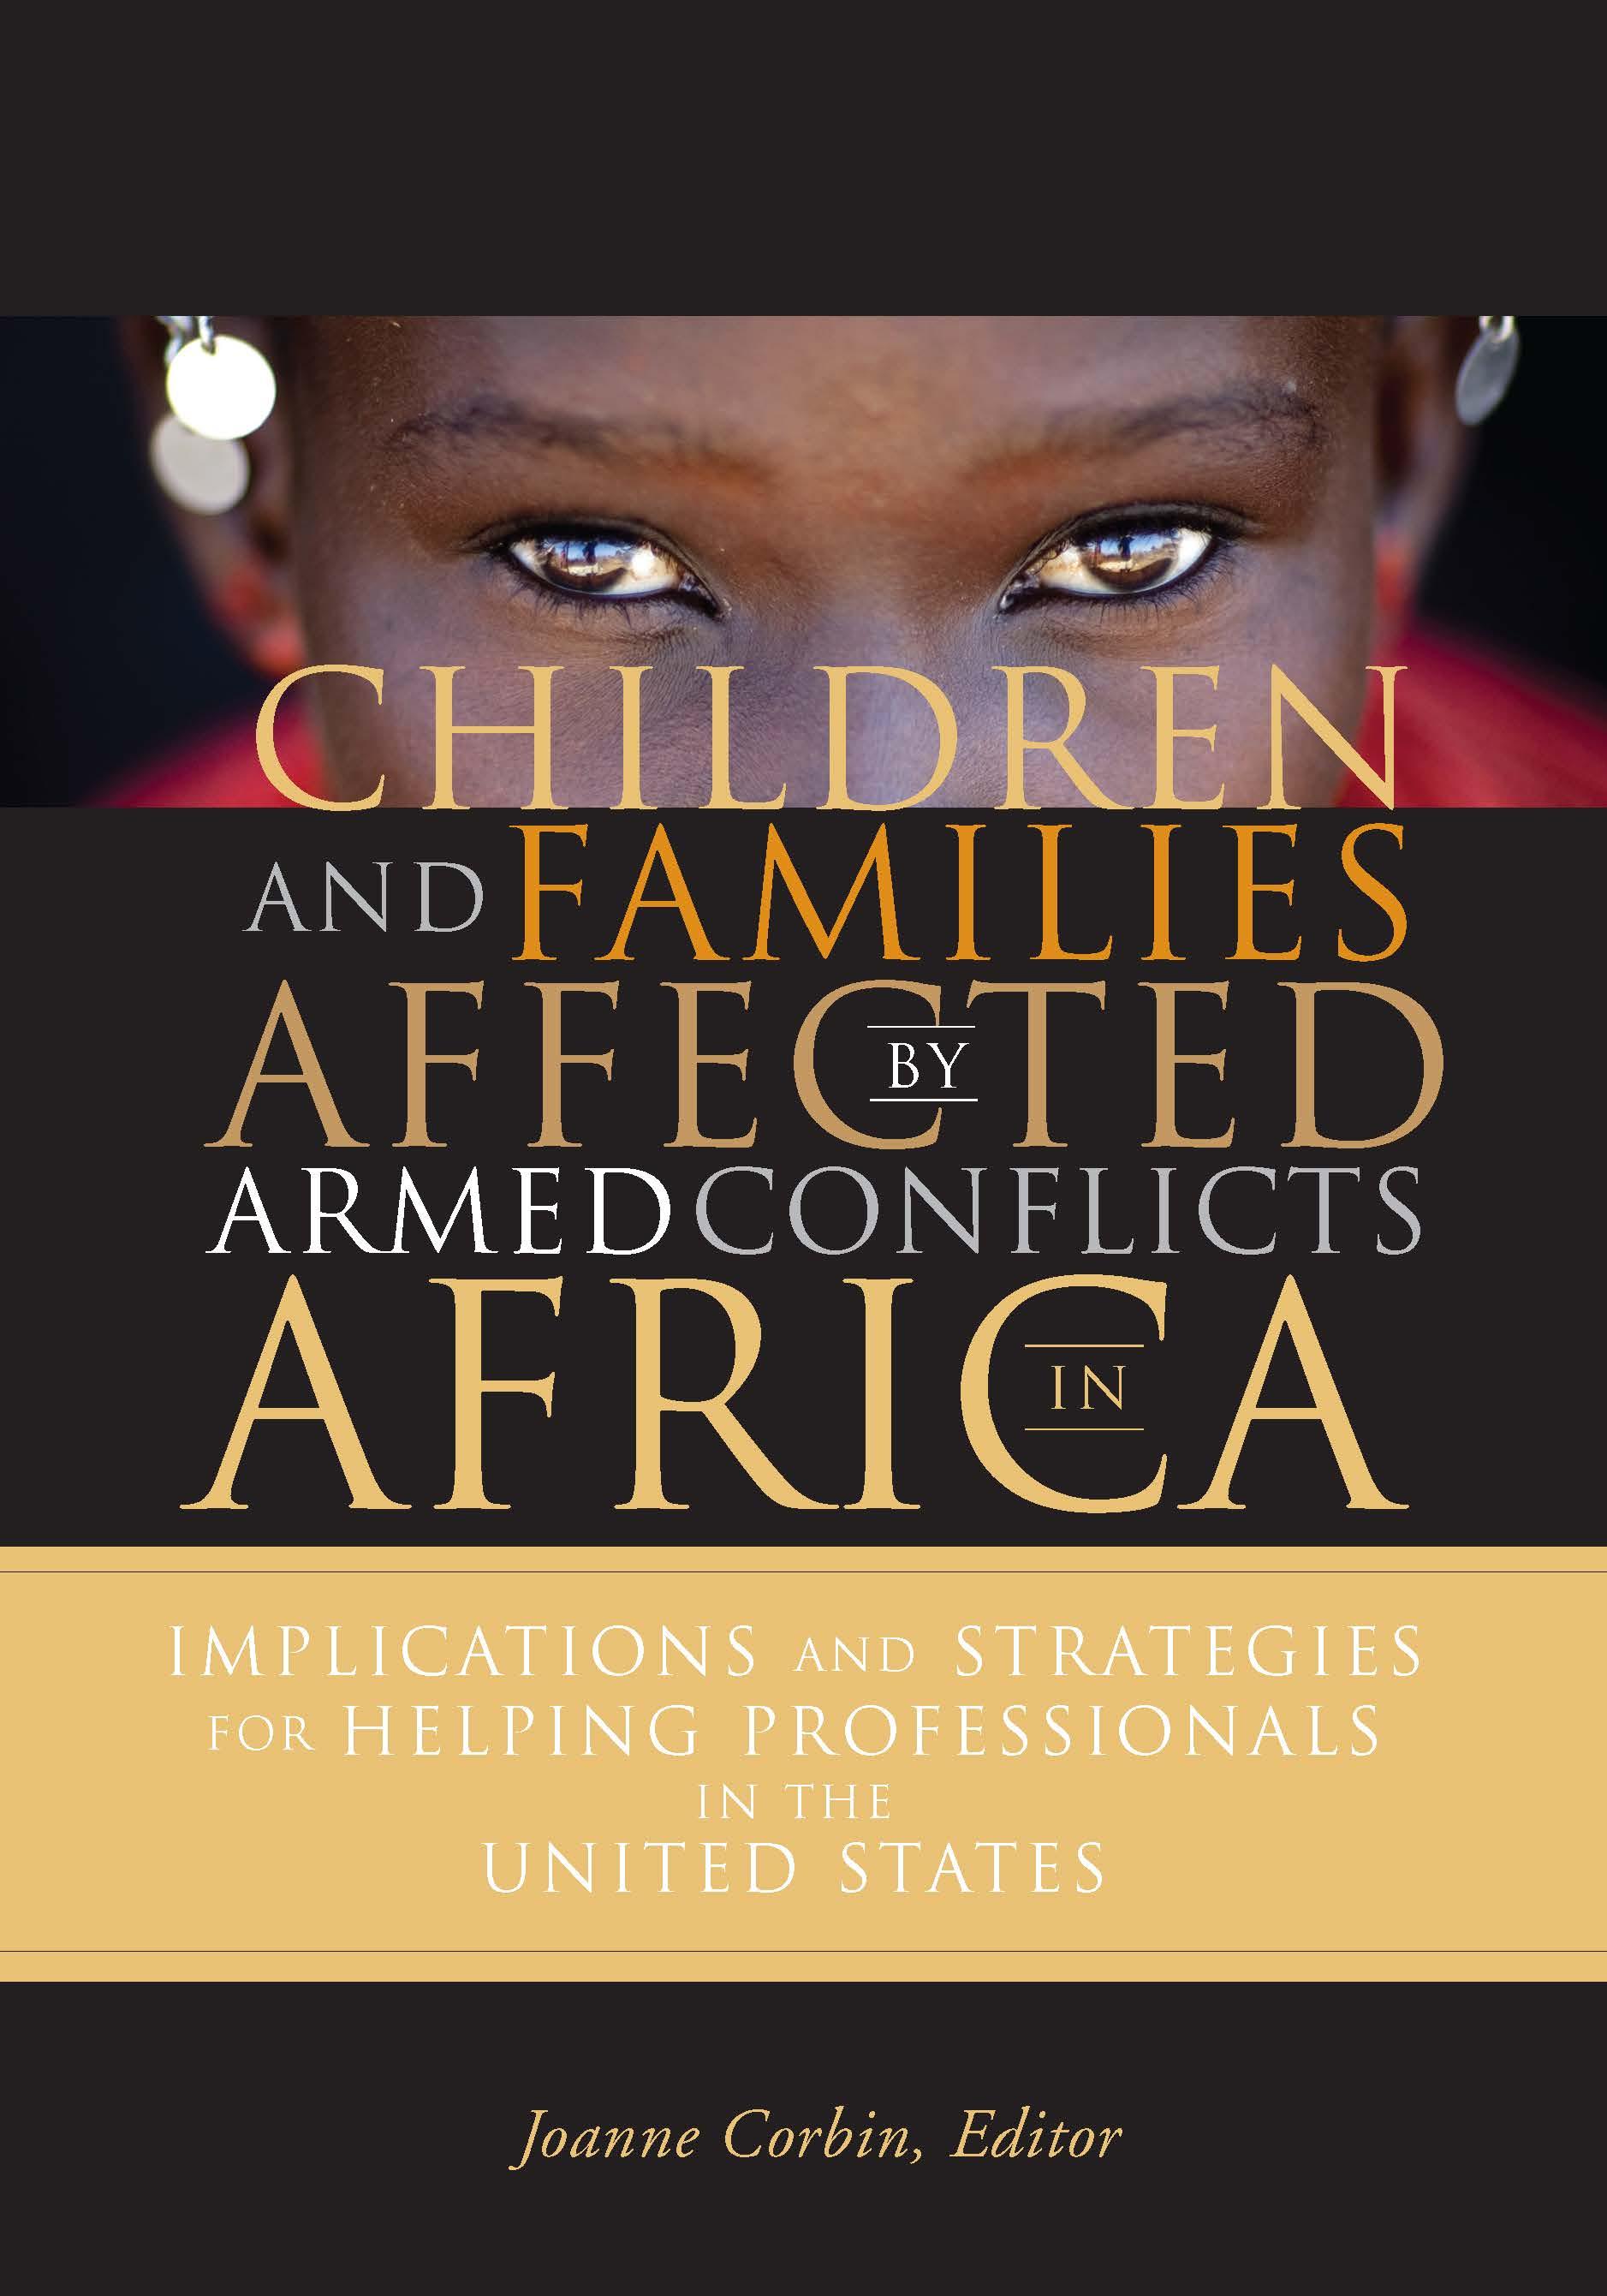 Zambia and children impacted by armed conflicts